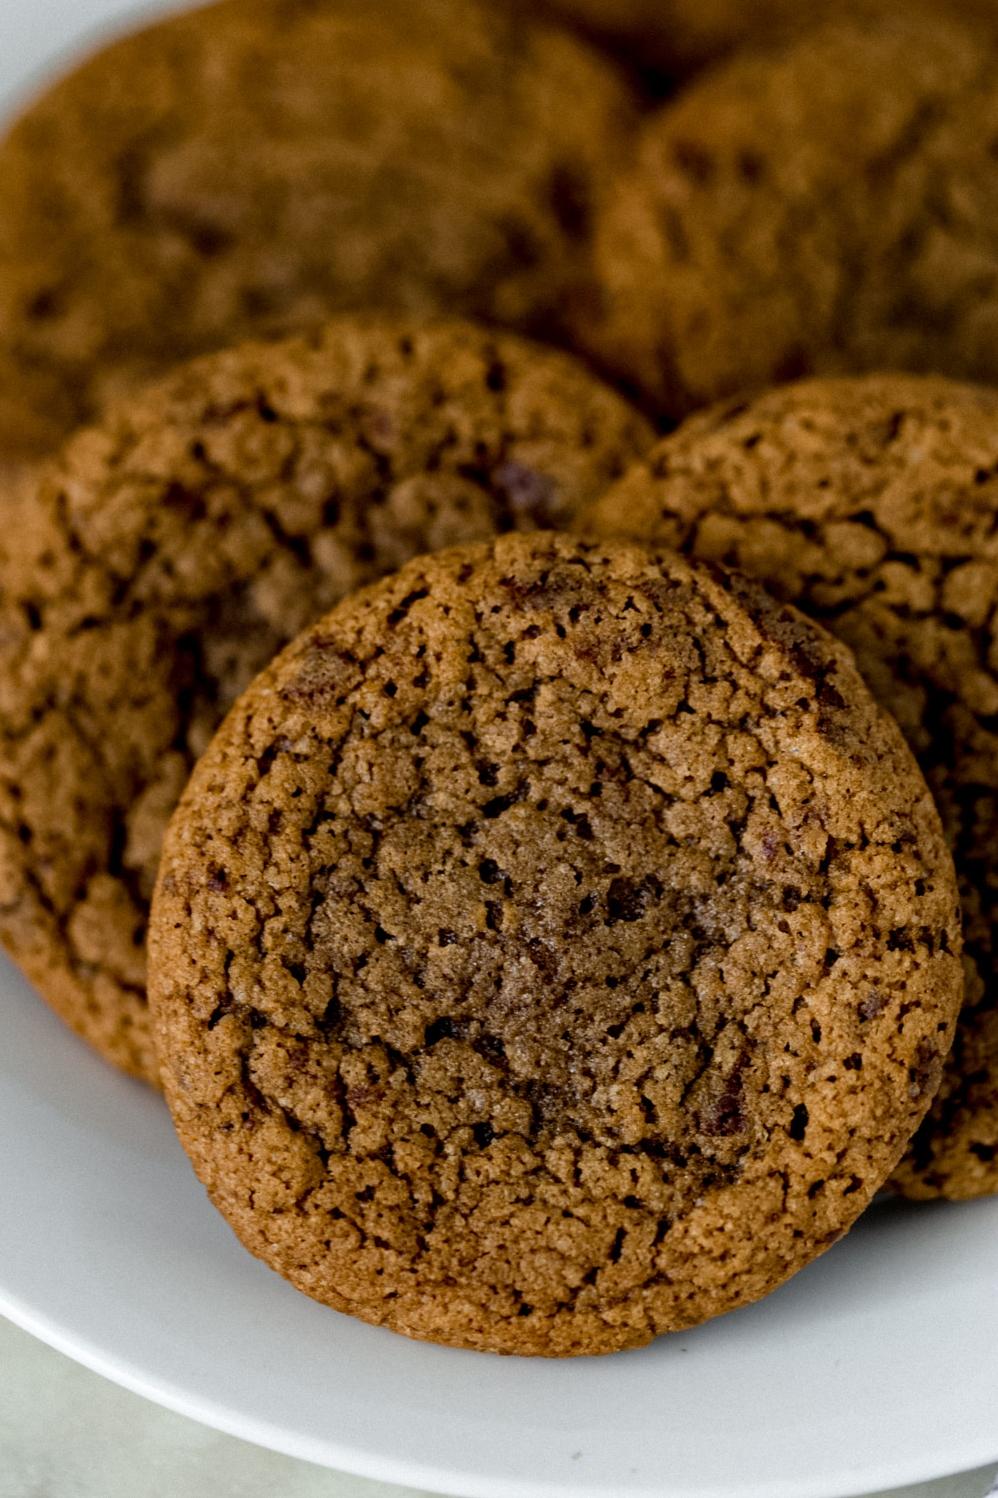  The combination of coffee and chocolate is perfectly balanced in this cookie recipe.